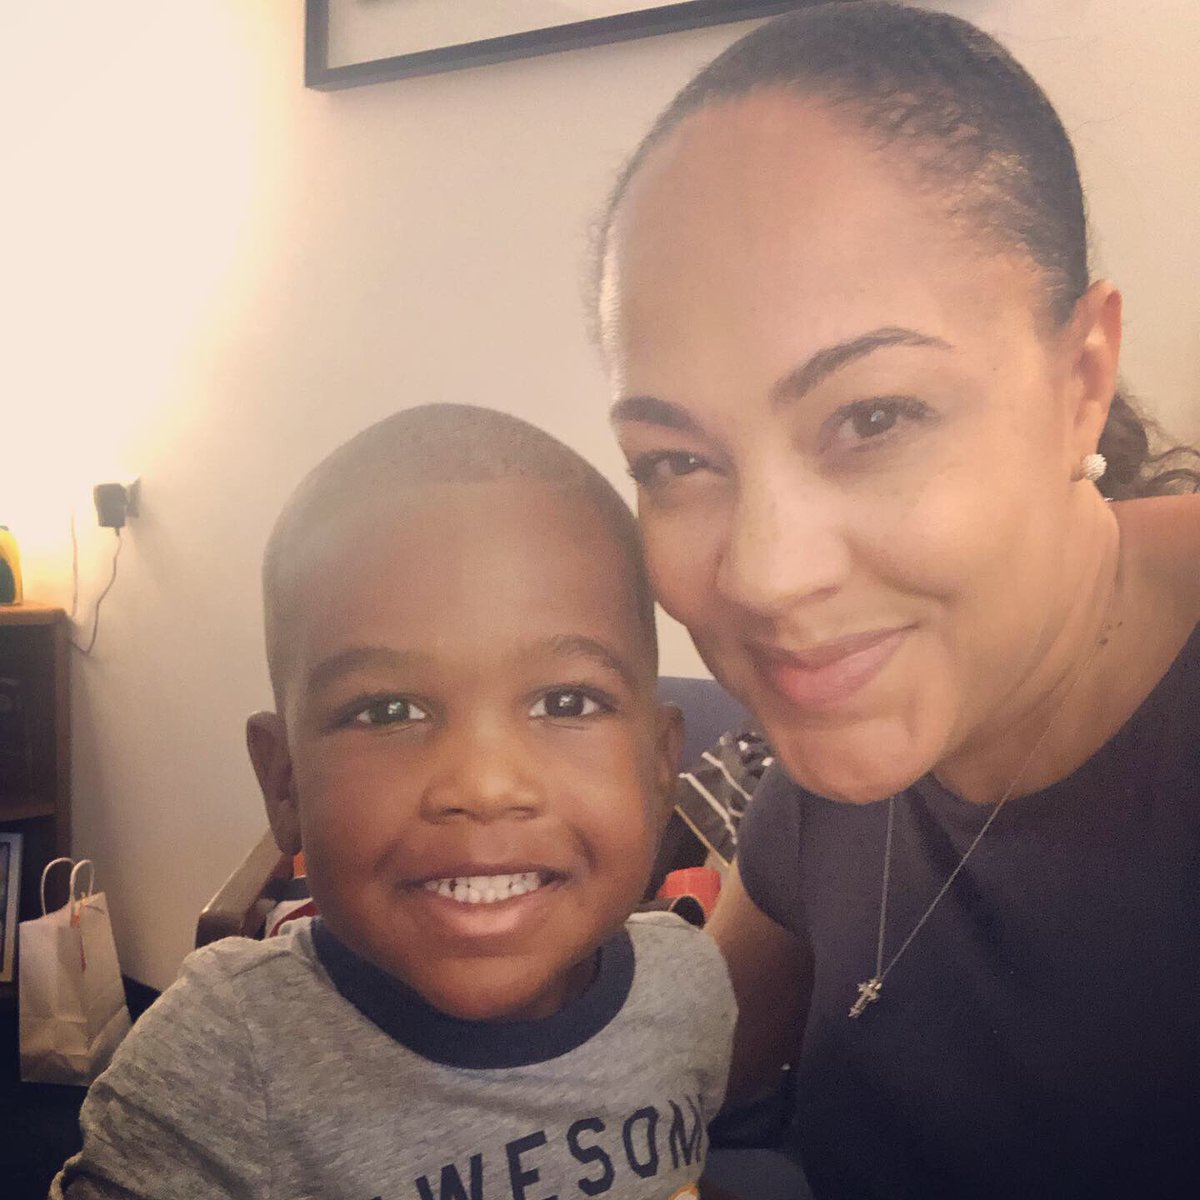 Just me and my little early riser getting in some work on the weekend...school starts soon! 🙌🏽 He was so good! 🥰#PrincipalMom #GetItDone